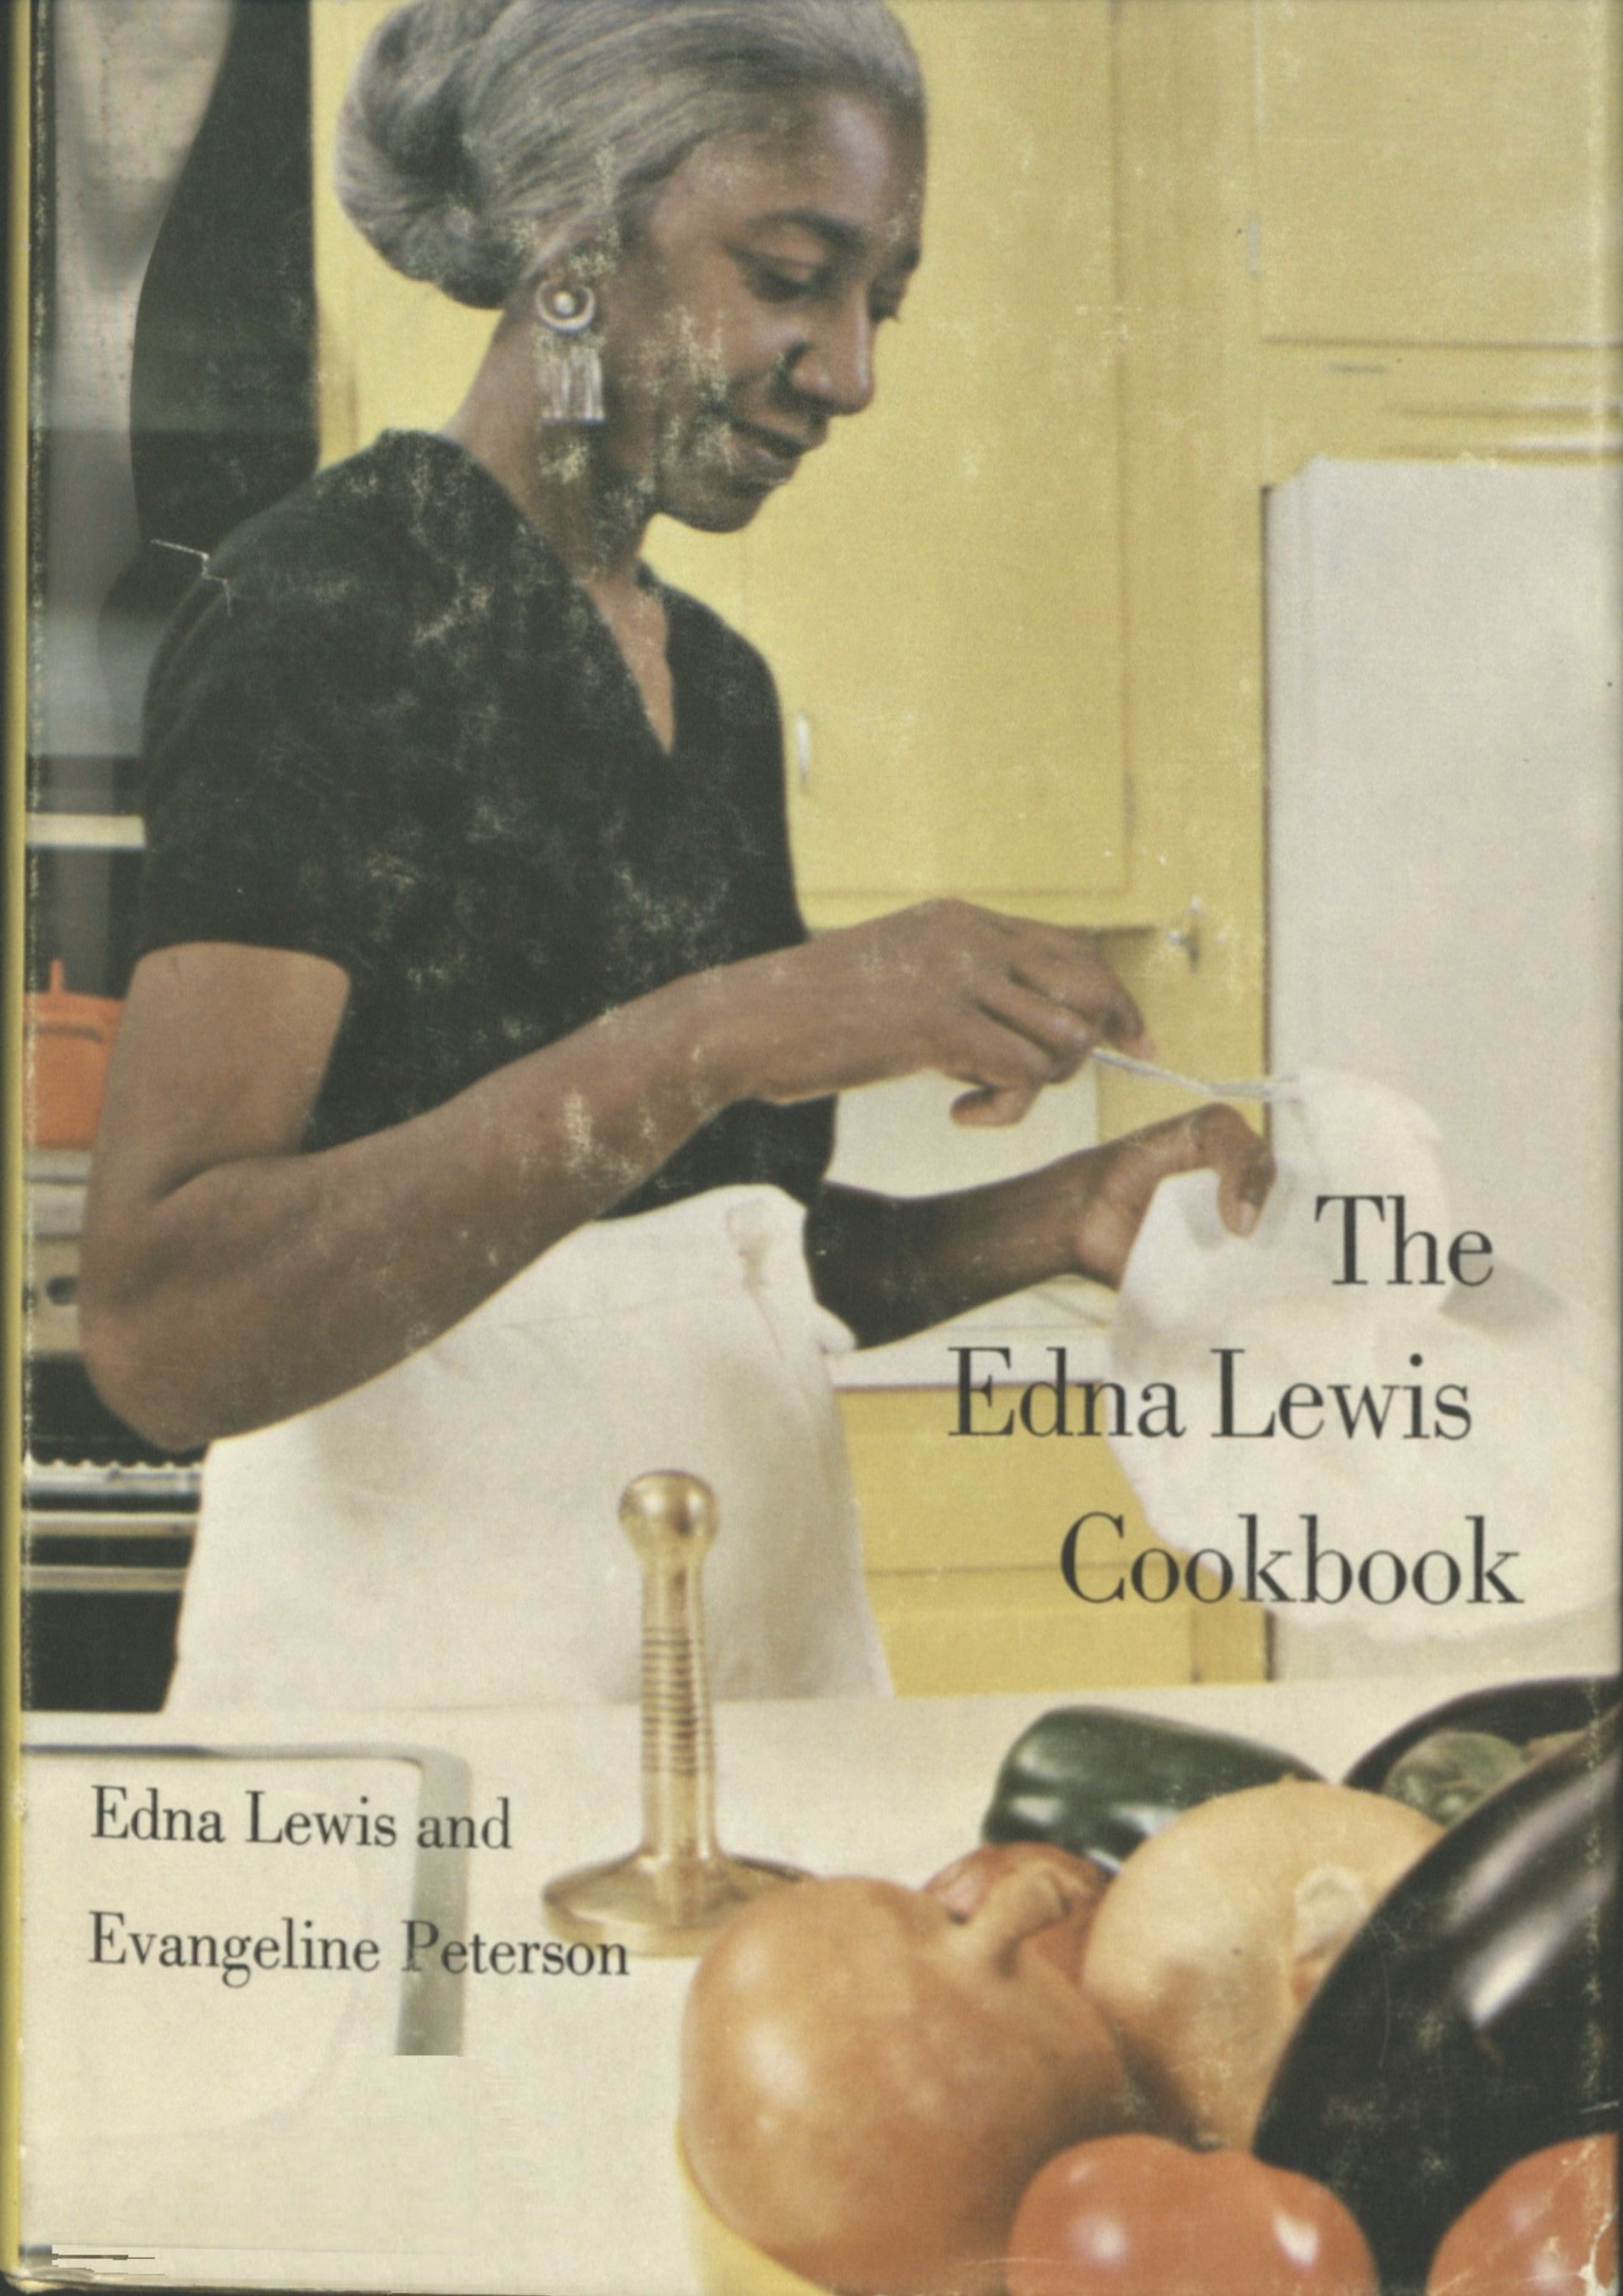 Cover of The Edna Lewis Cookbook (1972) courtesy of the Bentley Rare Book Museum